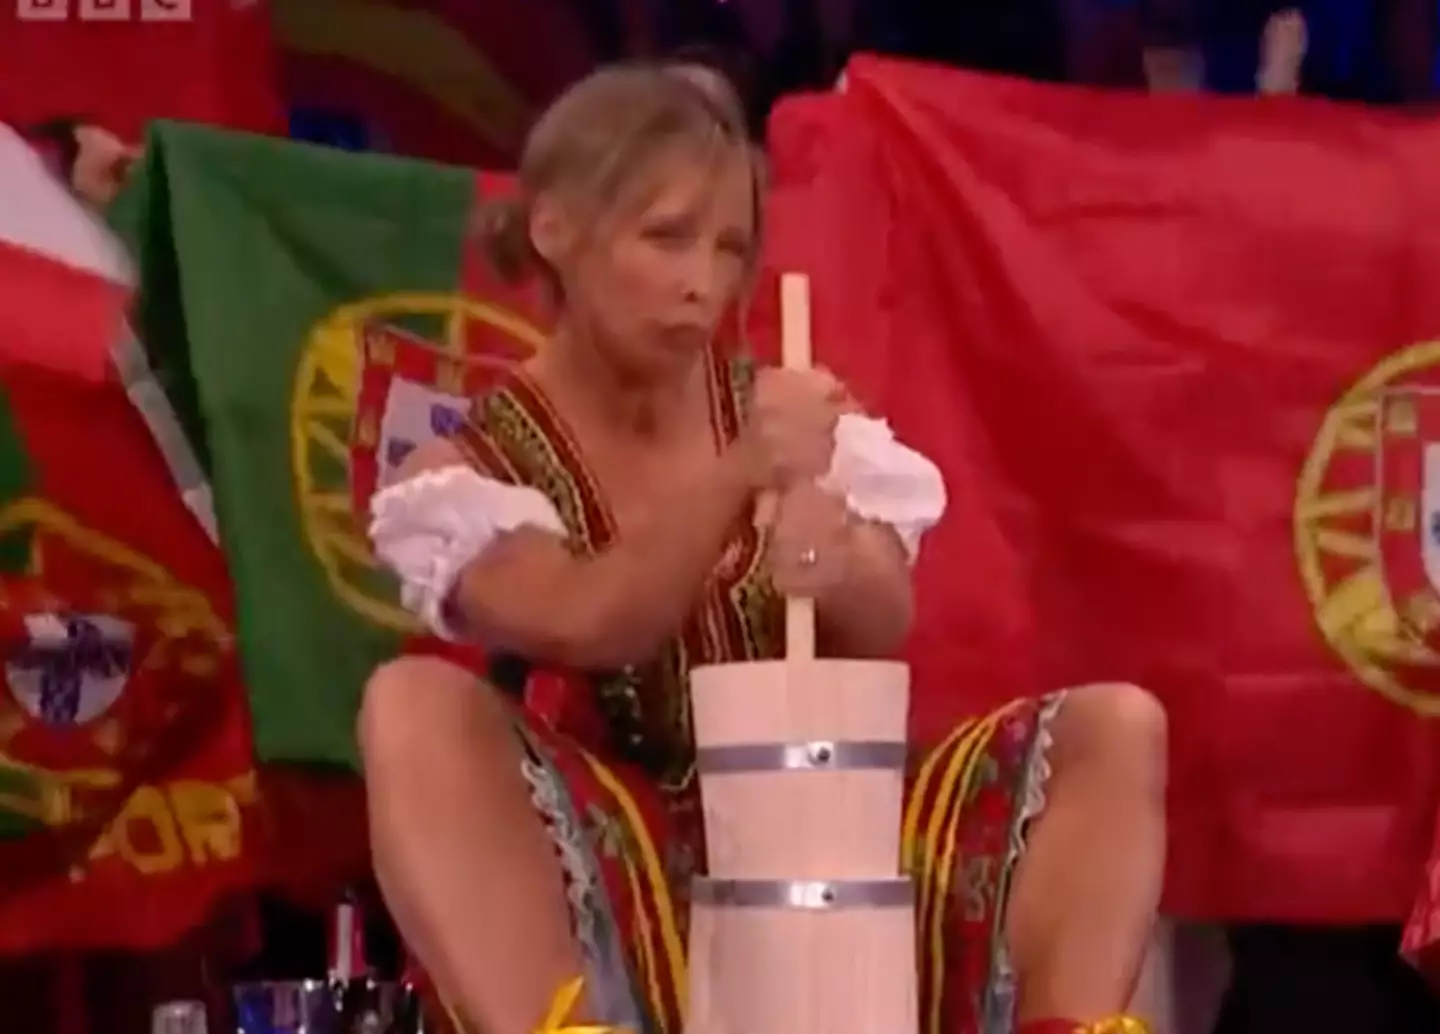 It was impossible to miss Giedroyc's butter churning skills.